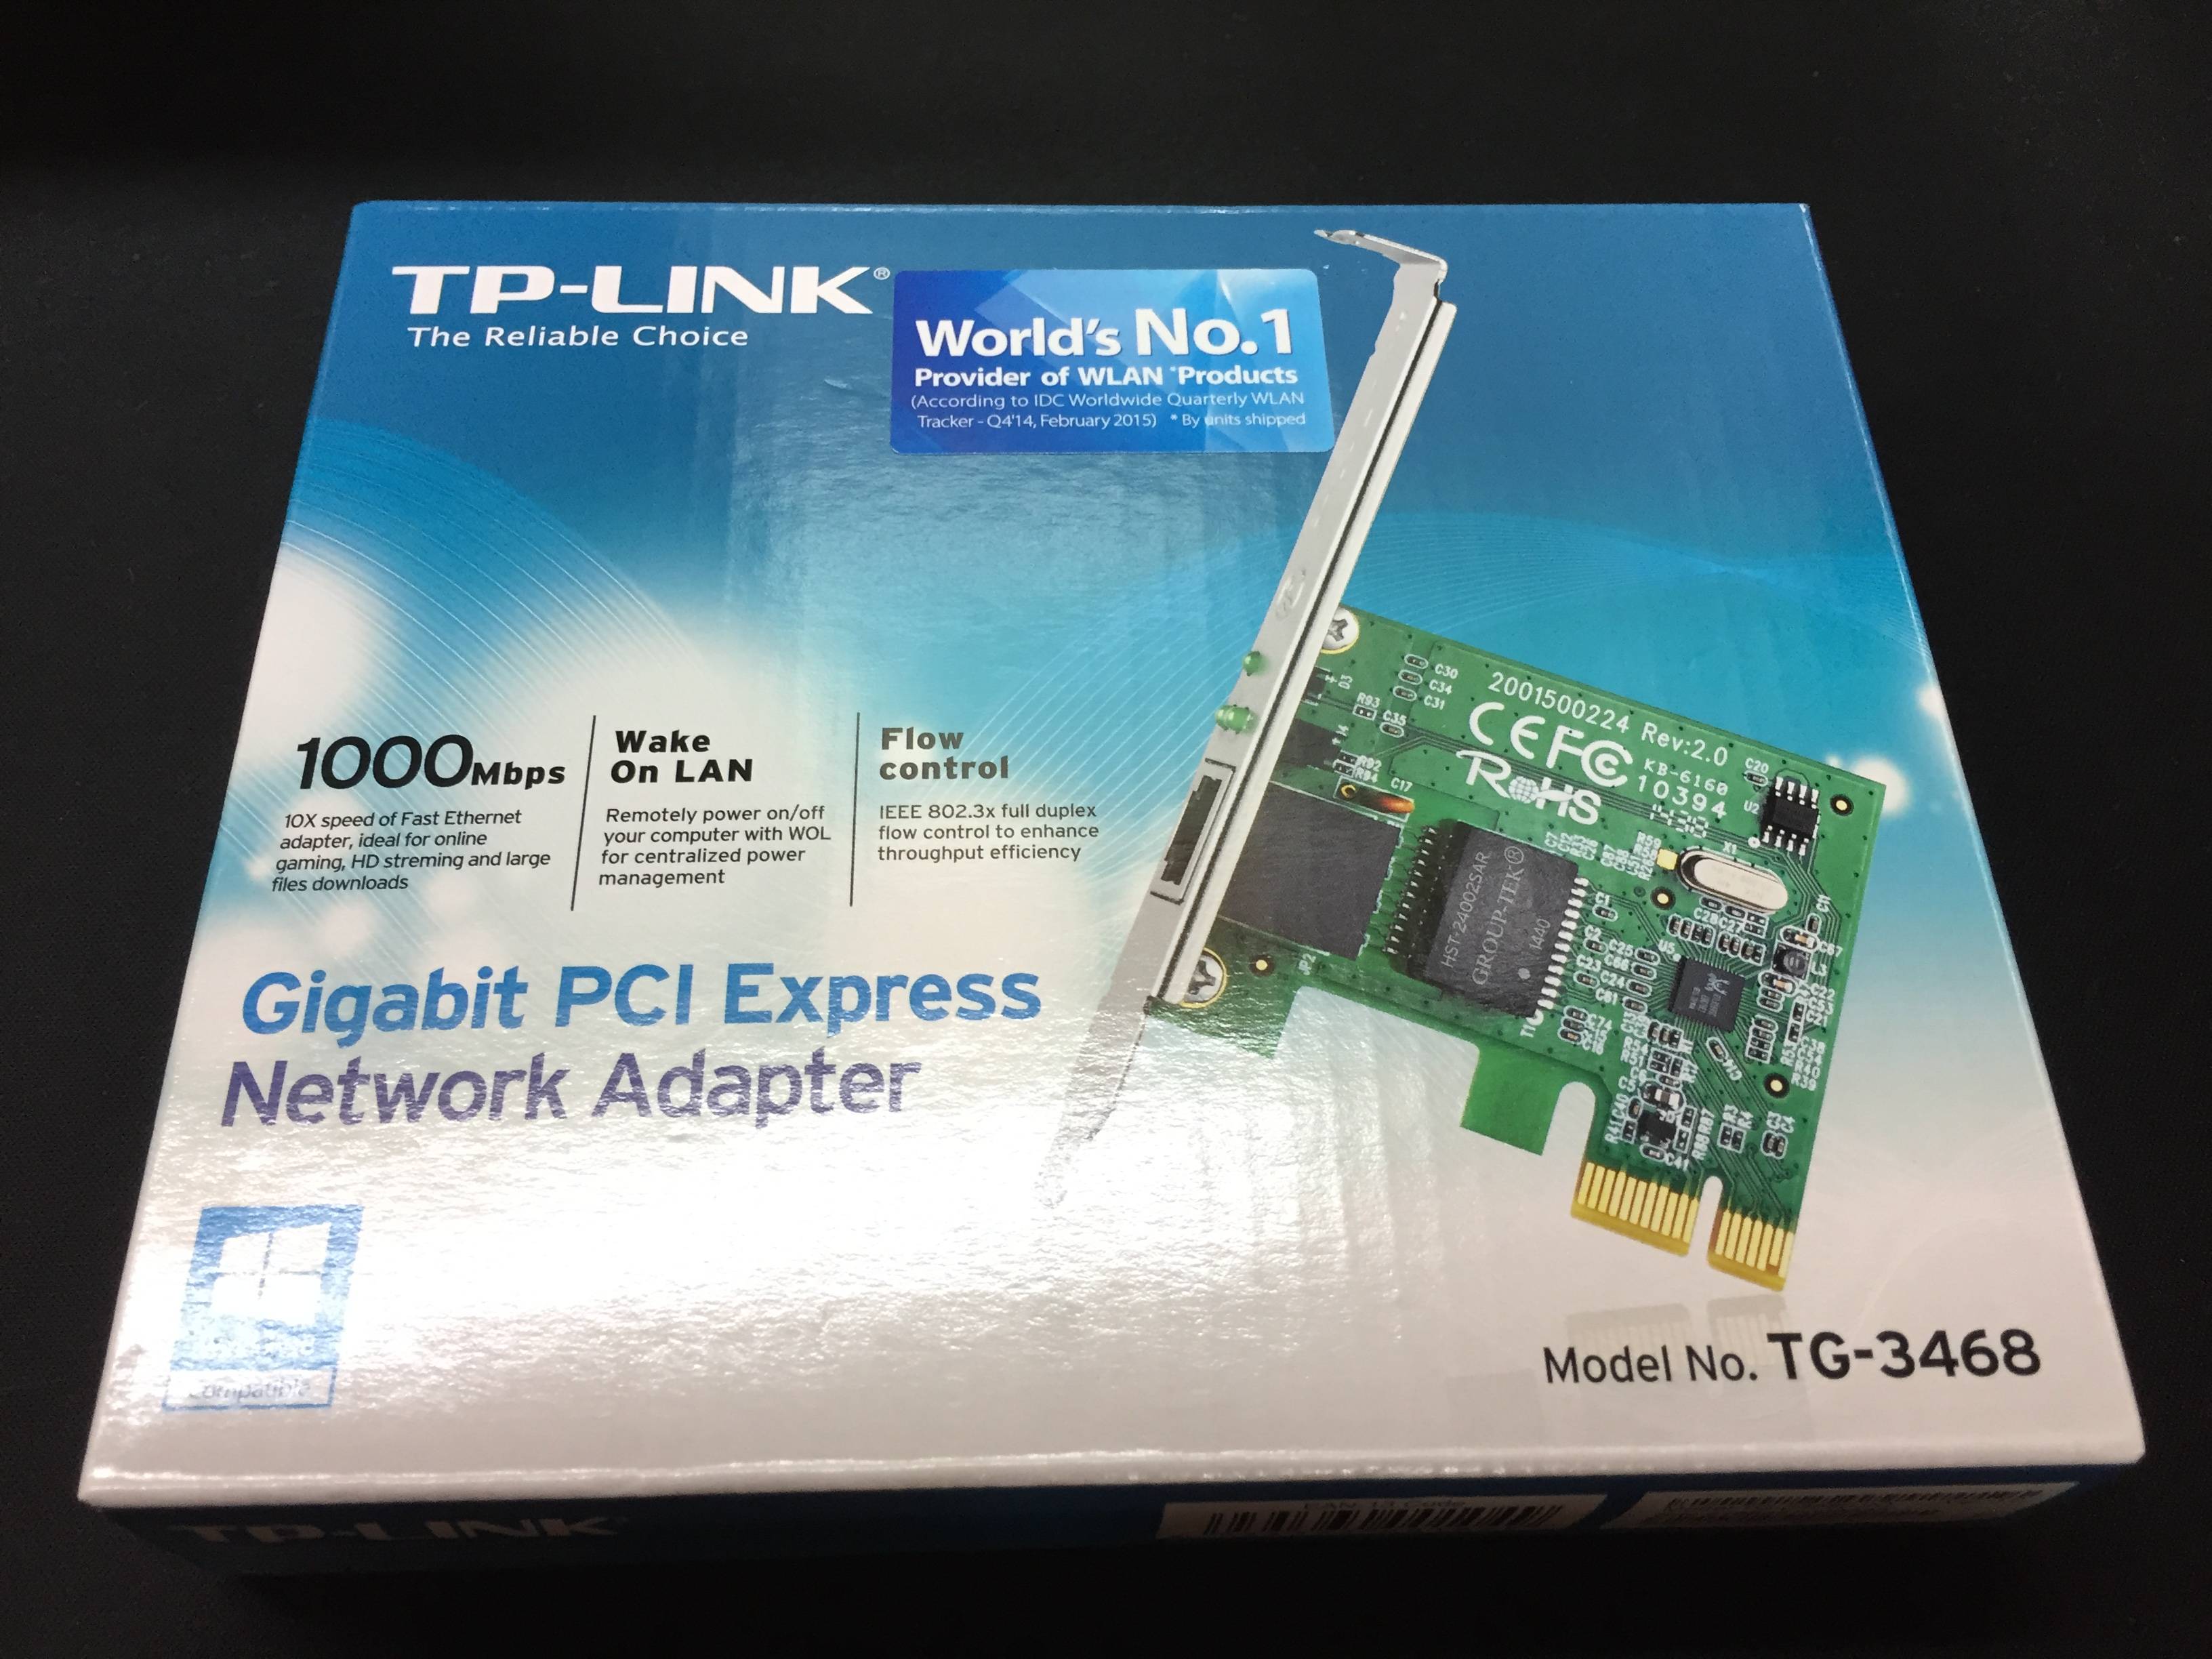 TP-Link TG-3468 PCIe Network Adapter